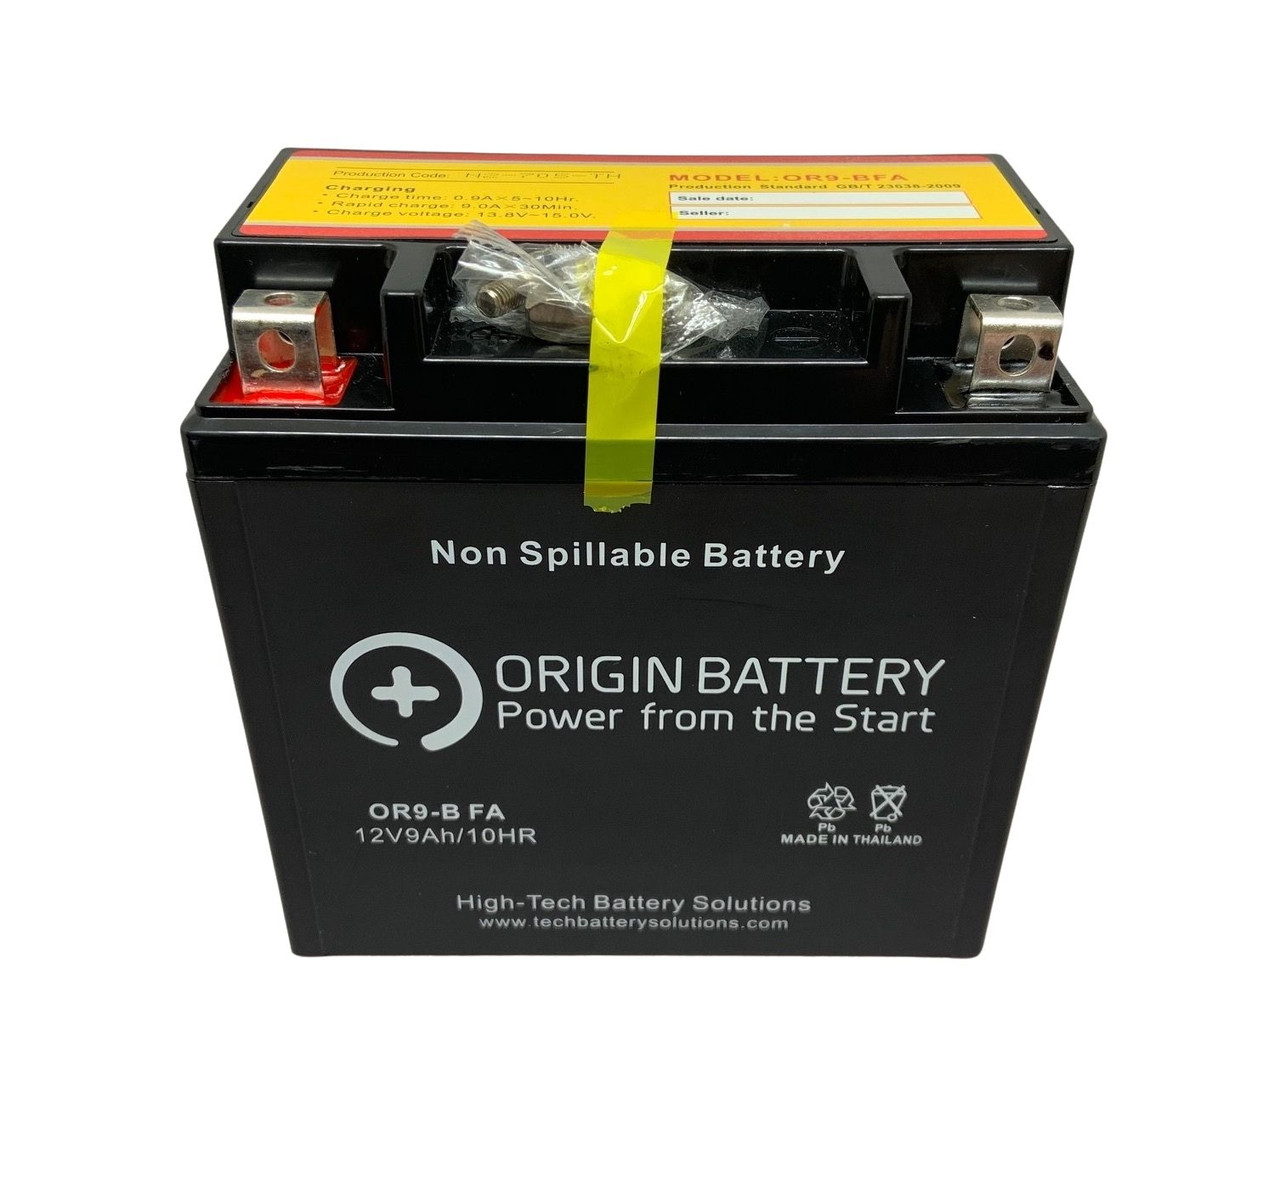 Is this the correct battery for a 1995 Suzuki quadrunner 250?